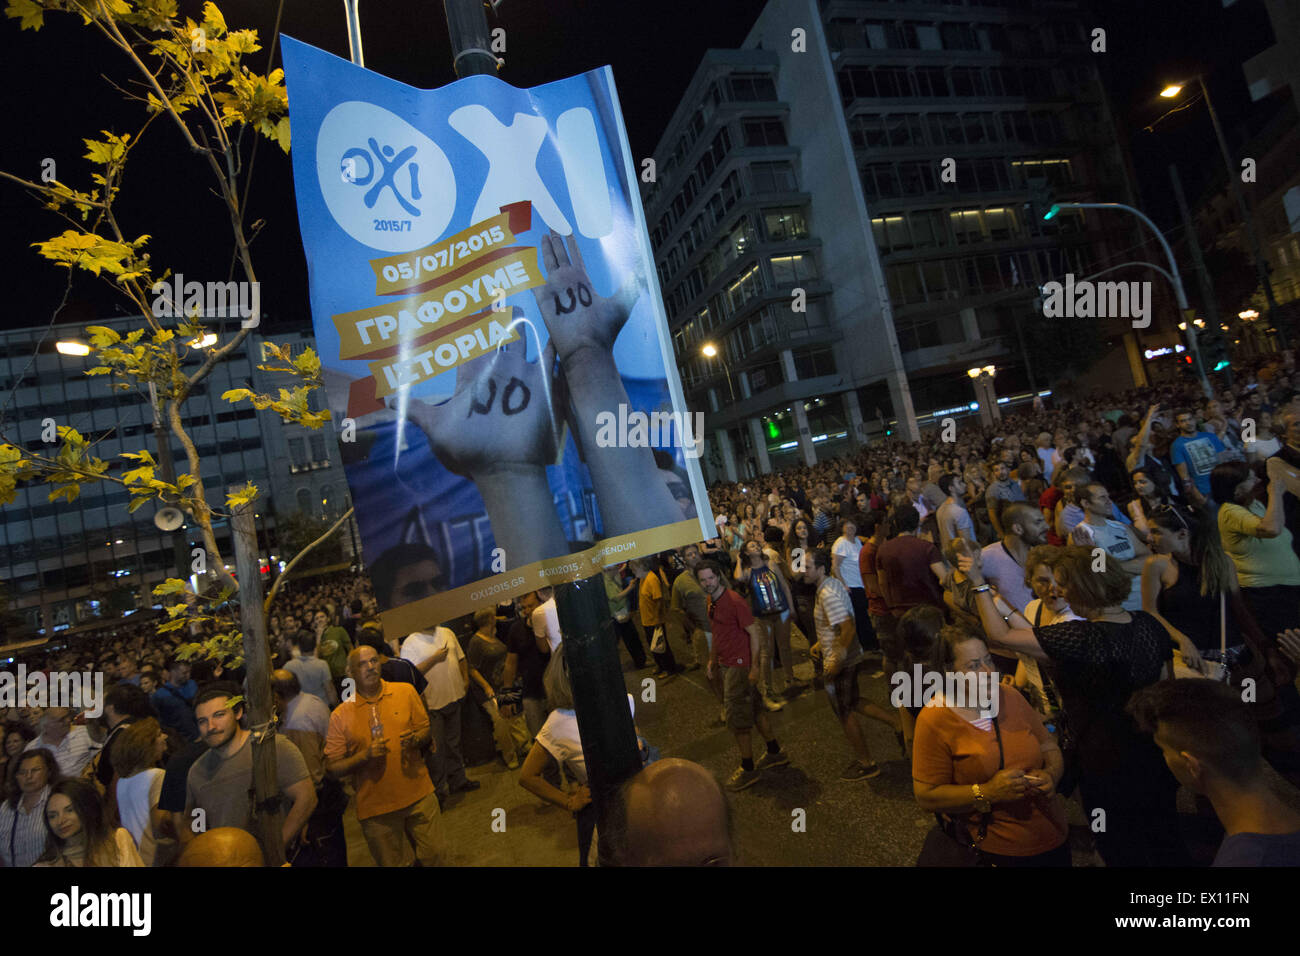 Athens, Greece. 3rd July, 2015. People with OXI(No) stickers shout slogans against the bailout deal. More than two hundred thousand people, according to estimates, gathered at Syntagma Square in front of the Greek parliament to protest in favor of a No vote, on the upcoming referendum where citizens will get to decide whether they agree or not to the bailout deal offered by the Institutions(ECB, IMF, EU) and the austerity measures that come with it. © Nikolas Georgiou/ZUMA Wire/ZUMAPRESS.com/Alamy Live News Stock Photo